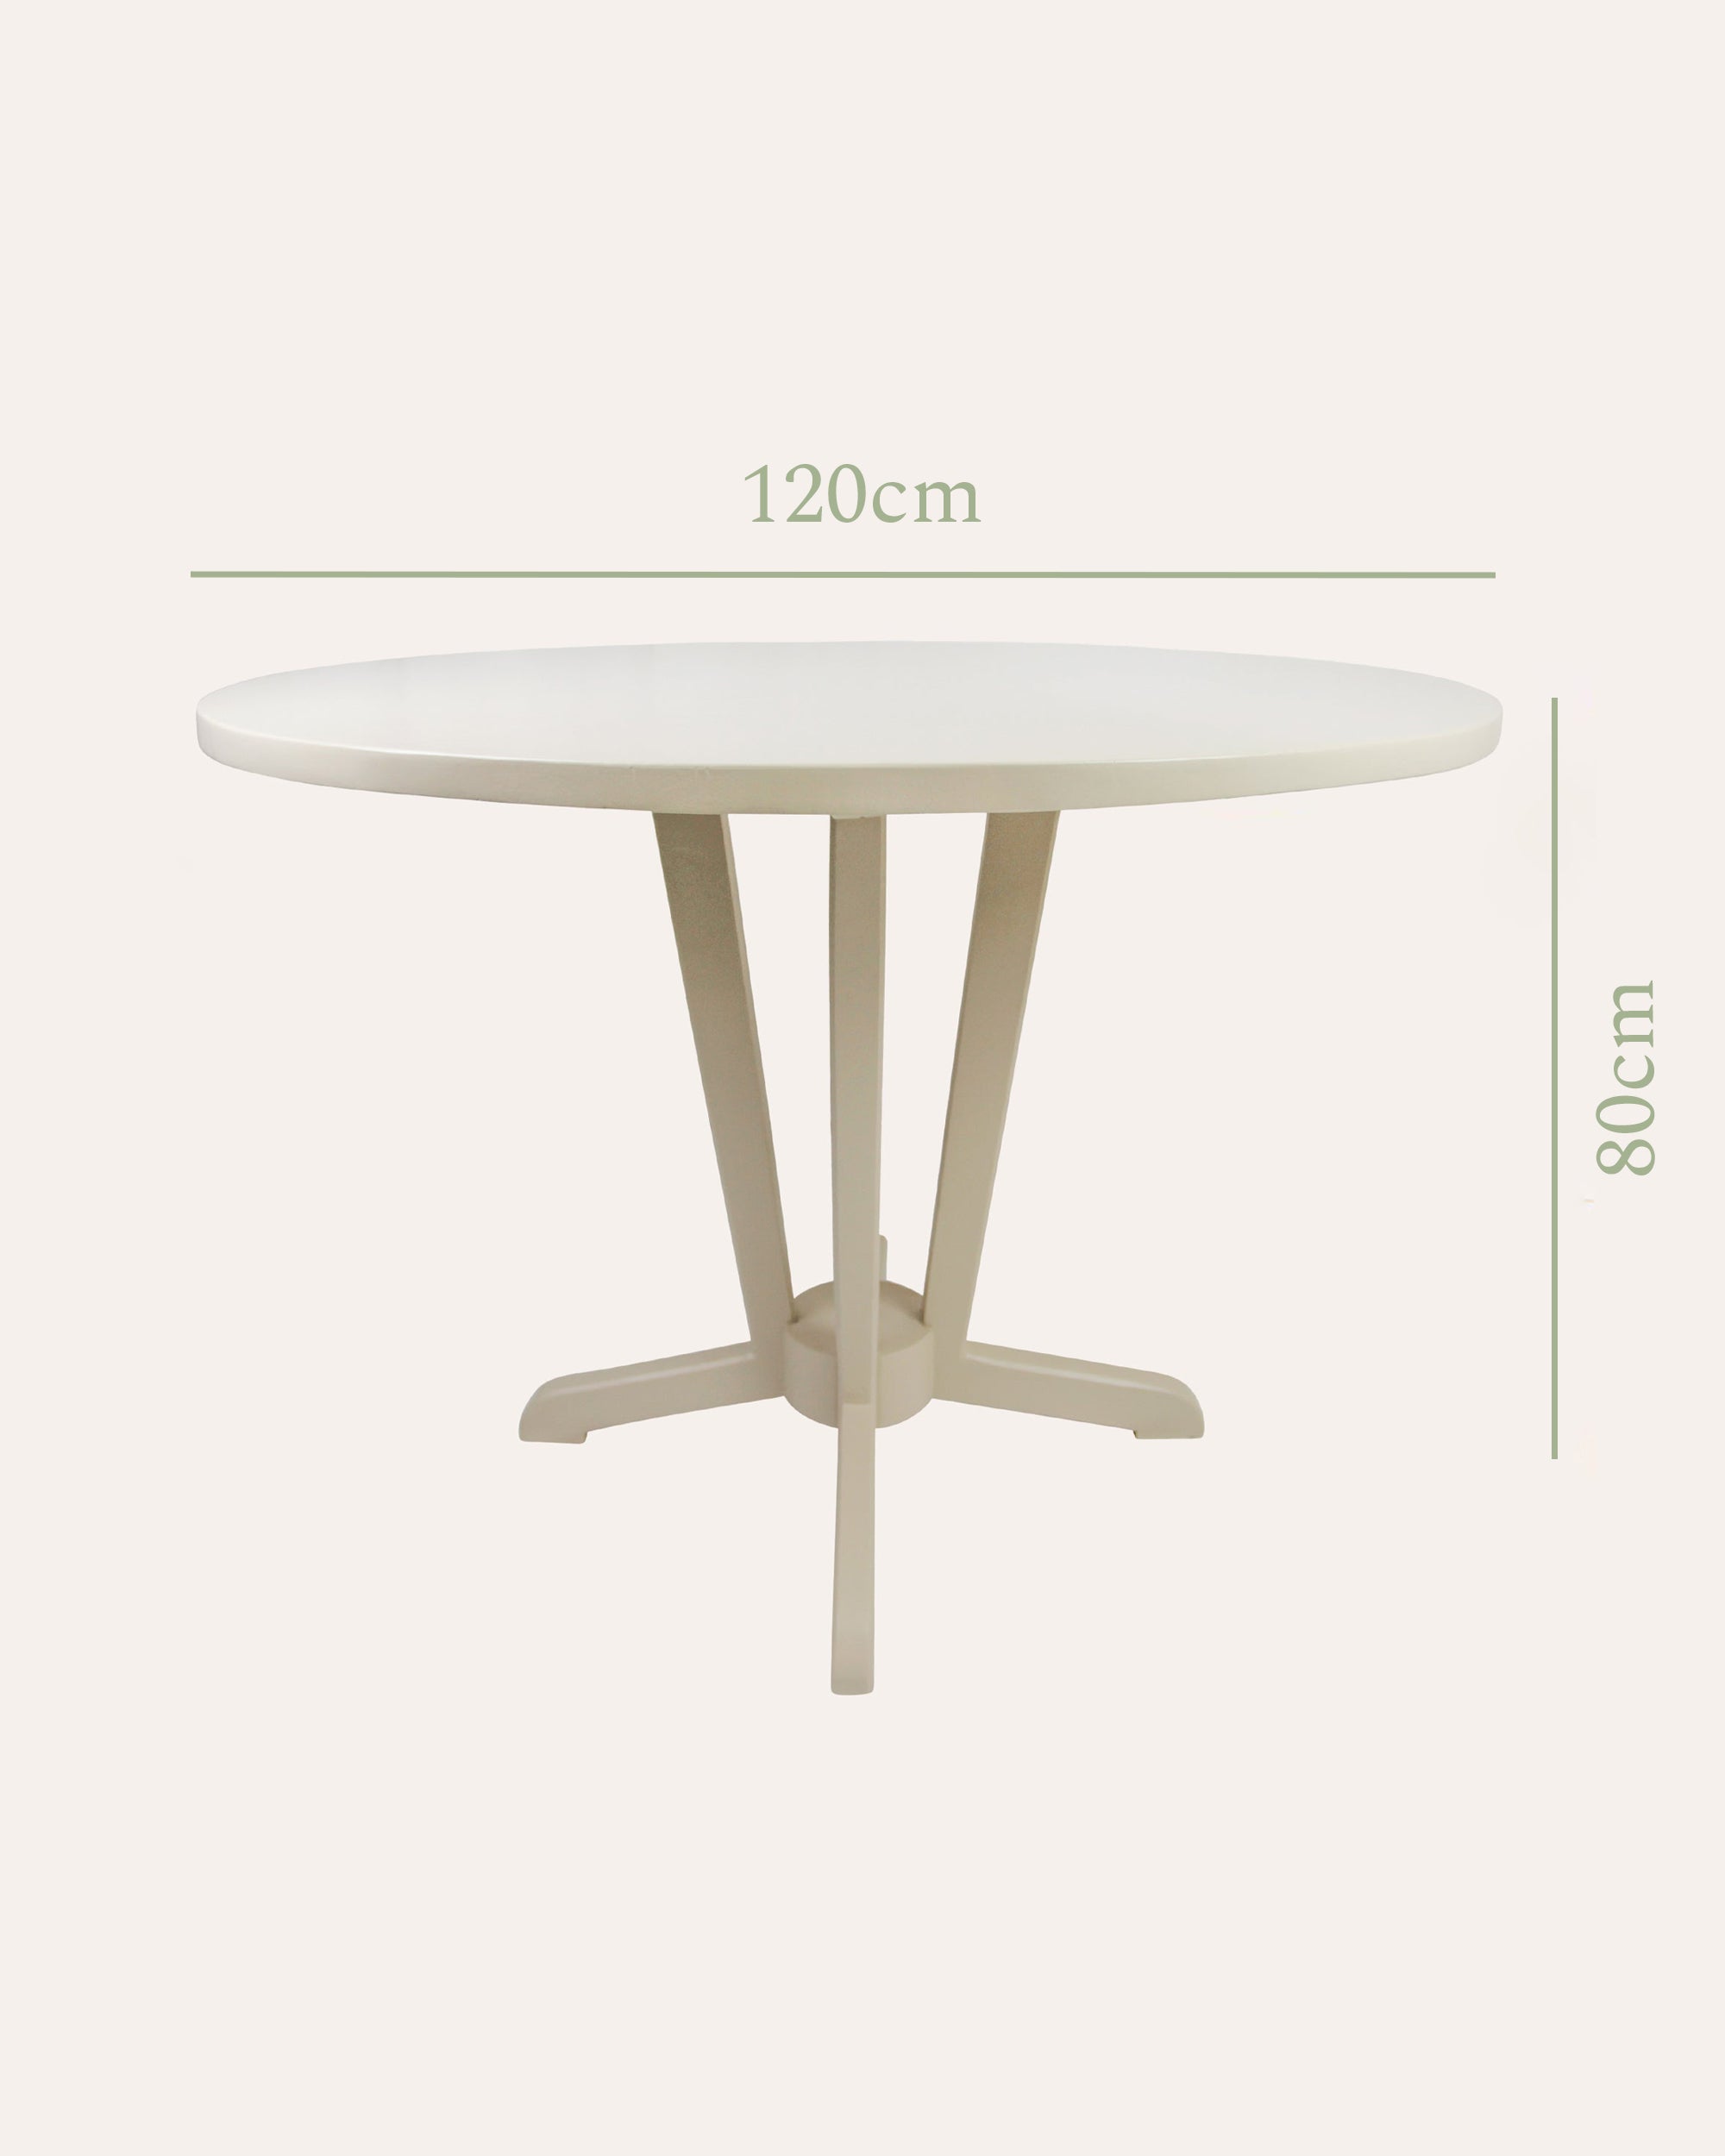 Wensum Pedestal Table - Taupe